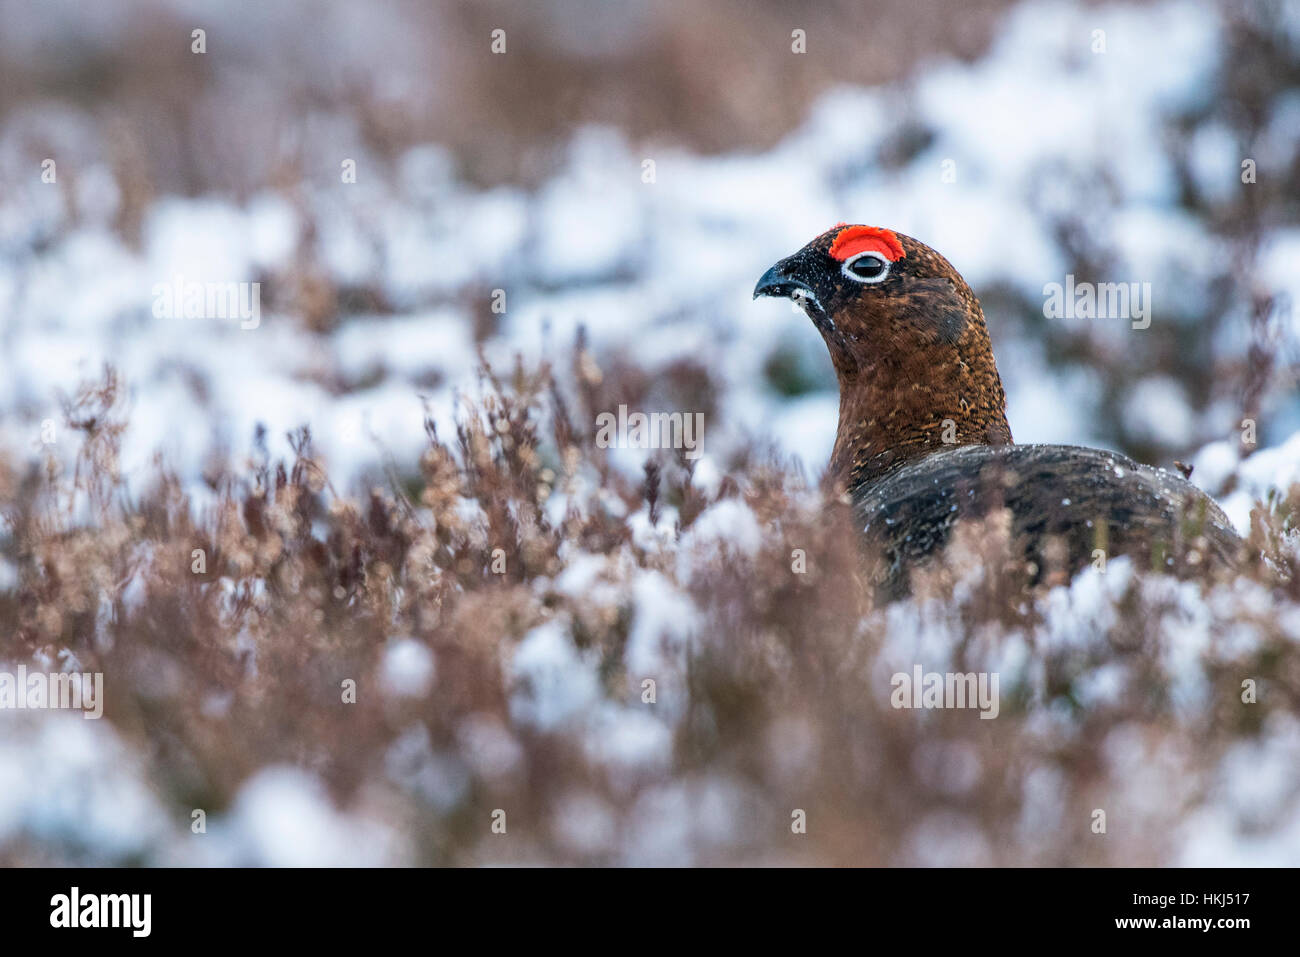 Red grouse (Lagopus lagopus scotica) in heathland with snow, Cairngorms National Park, Scottish Highlands, Scotland Stock Photo